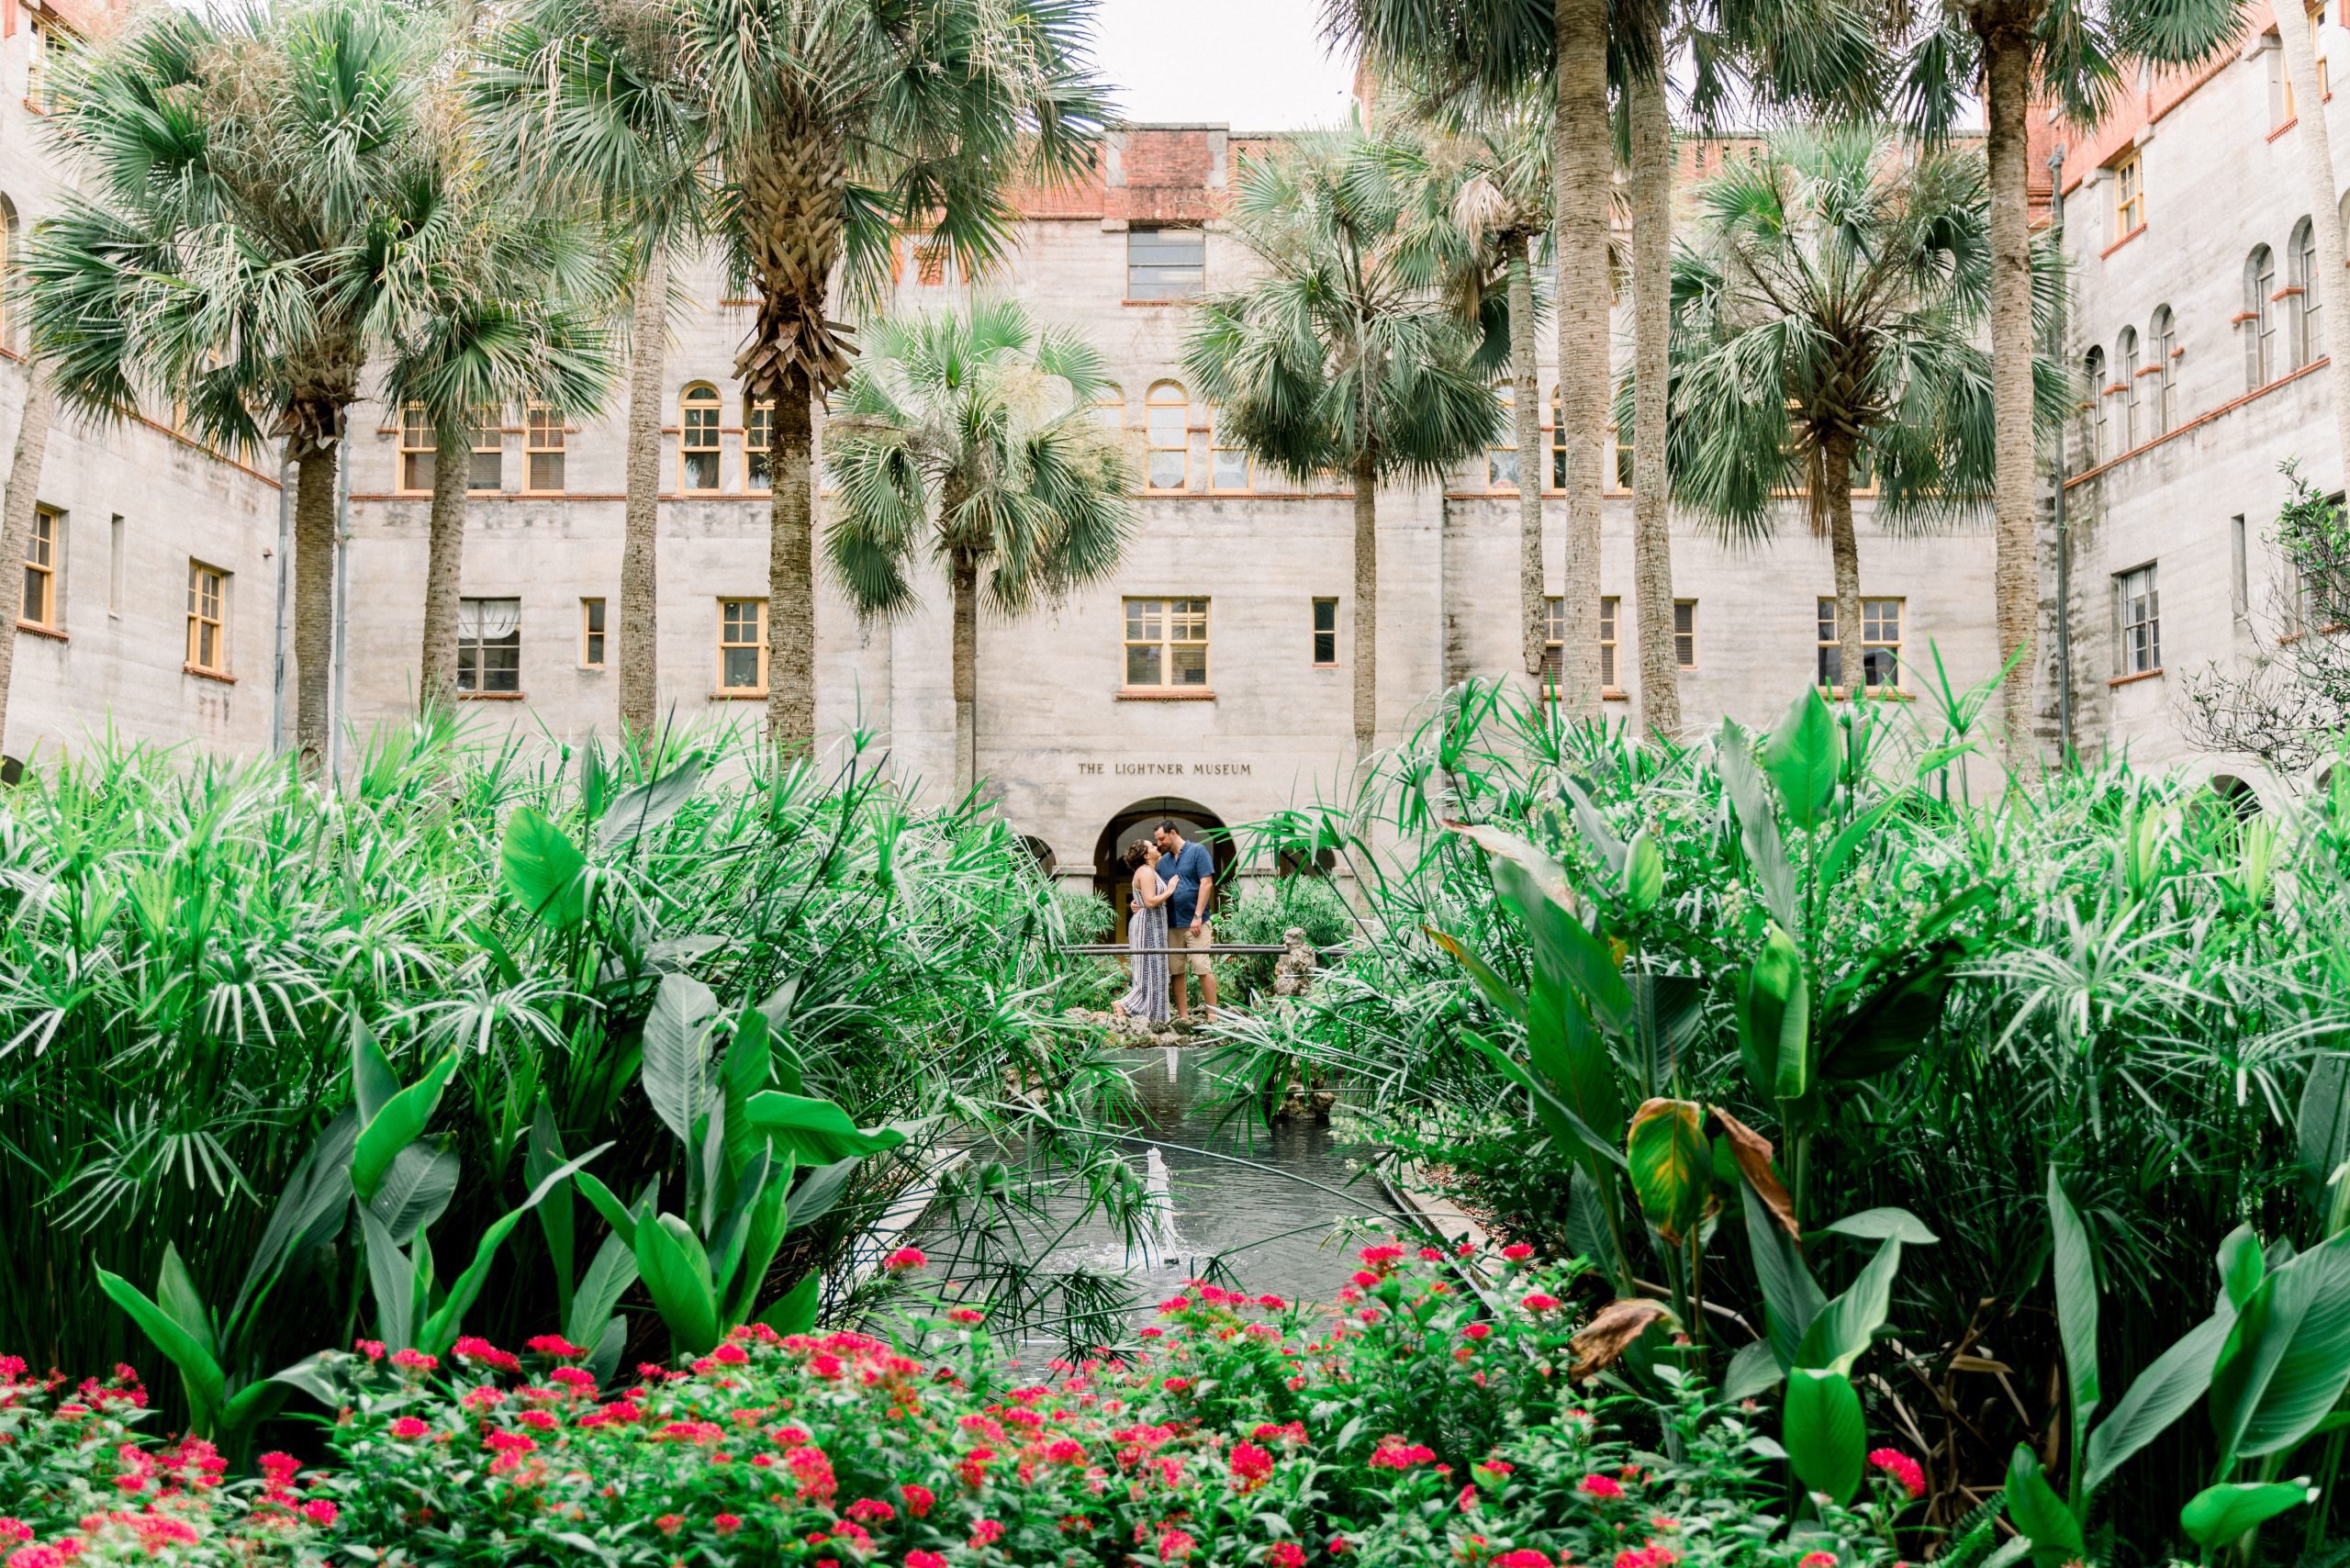 Engagement Photo in the courtyard of the Lightner Museum